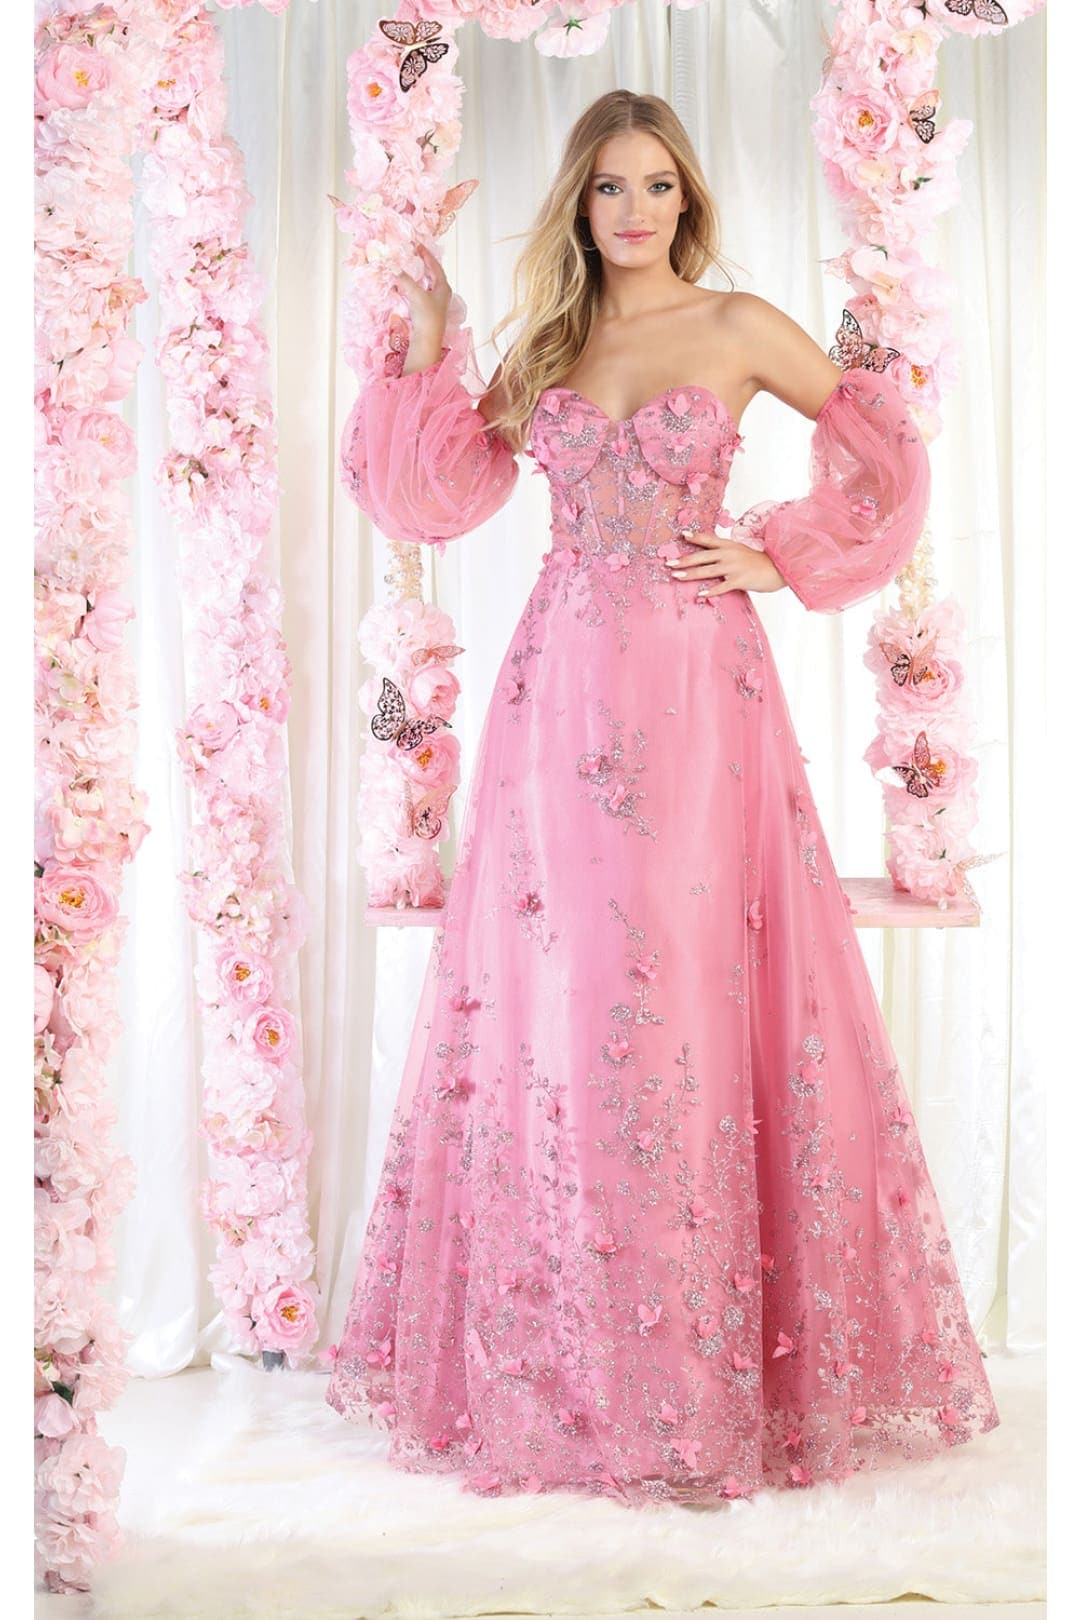 Royal Queen RQ8015 3D Floral Red Carpet Gown - ROSE / 4